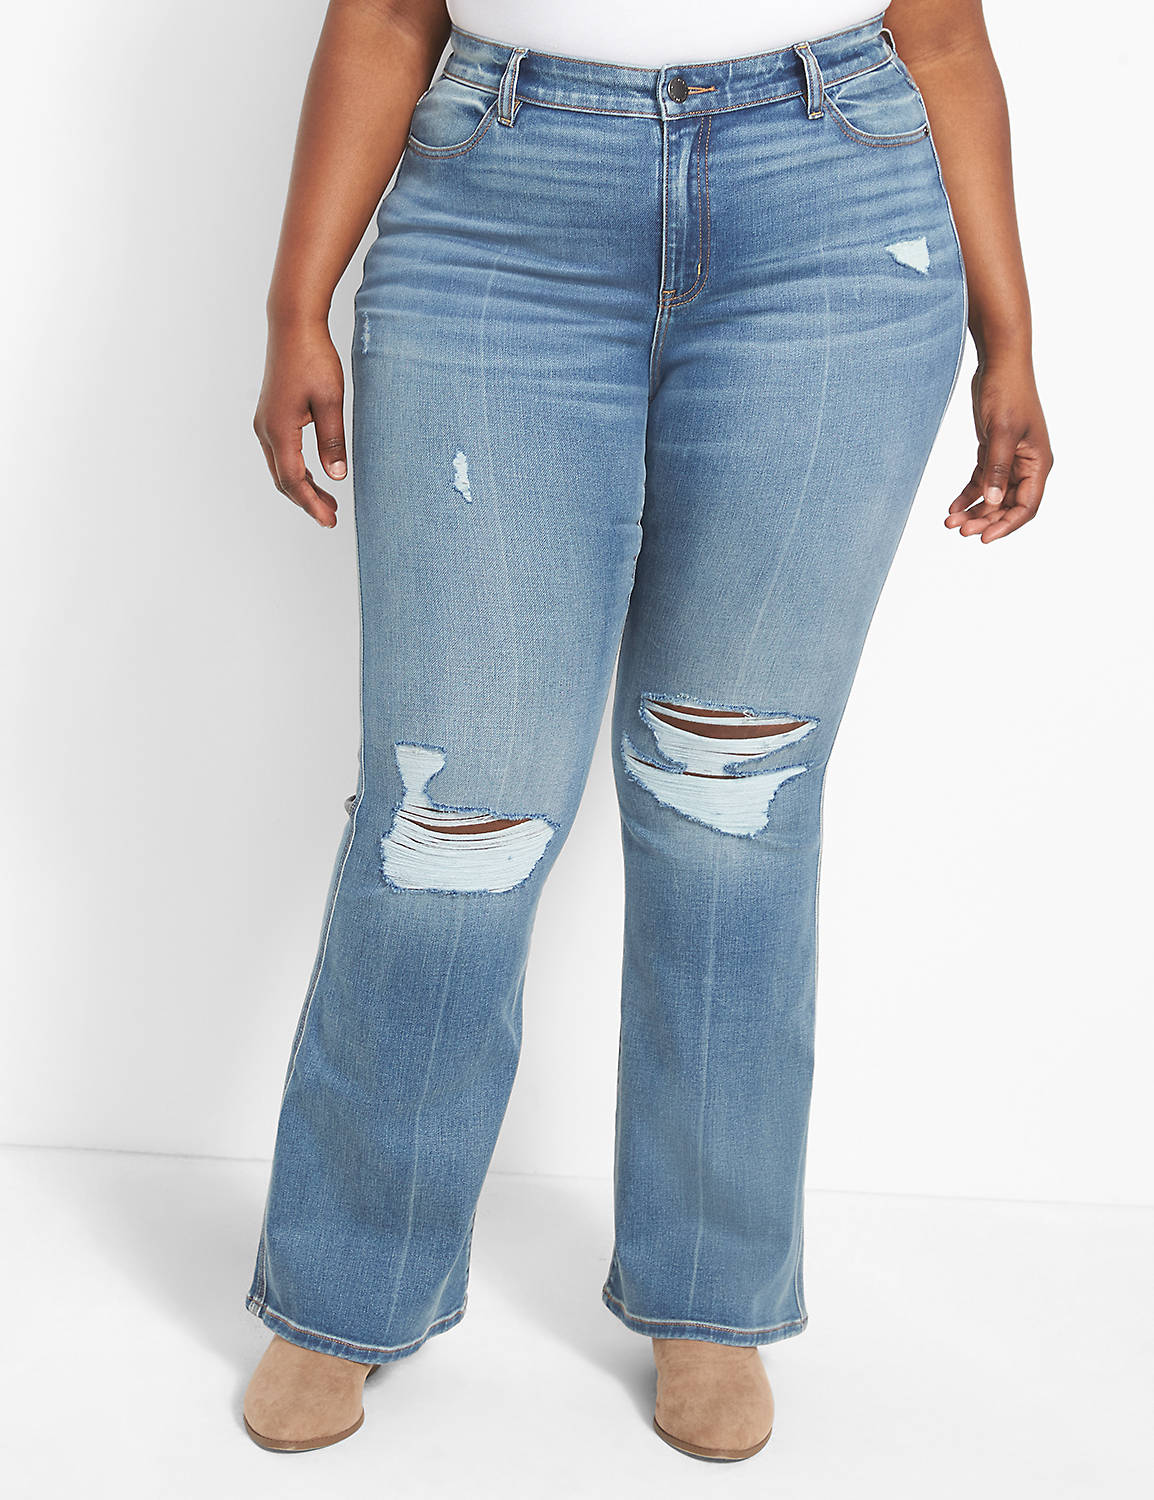 CURVY FIT HIGH RISE FLARE JEAN - BO Product Image 3